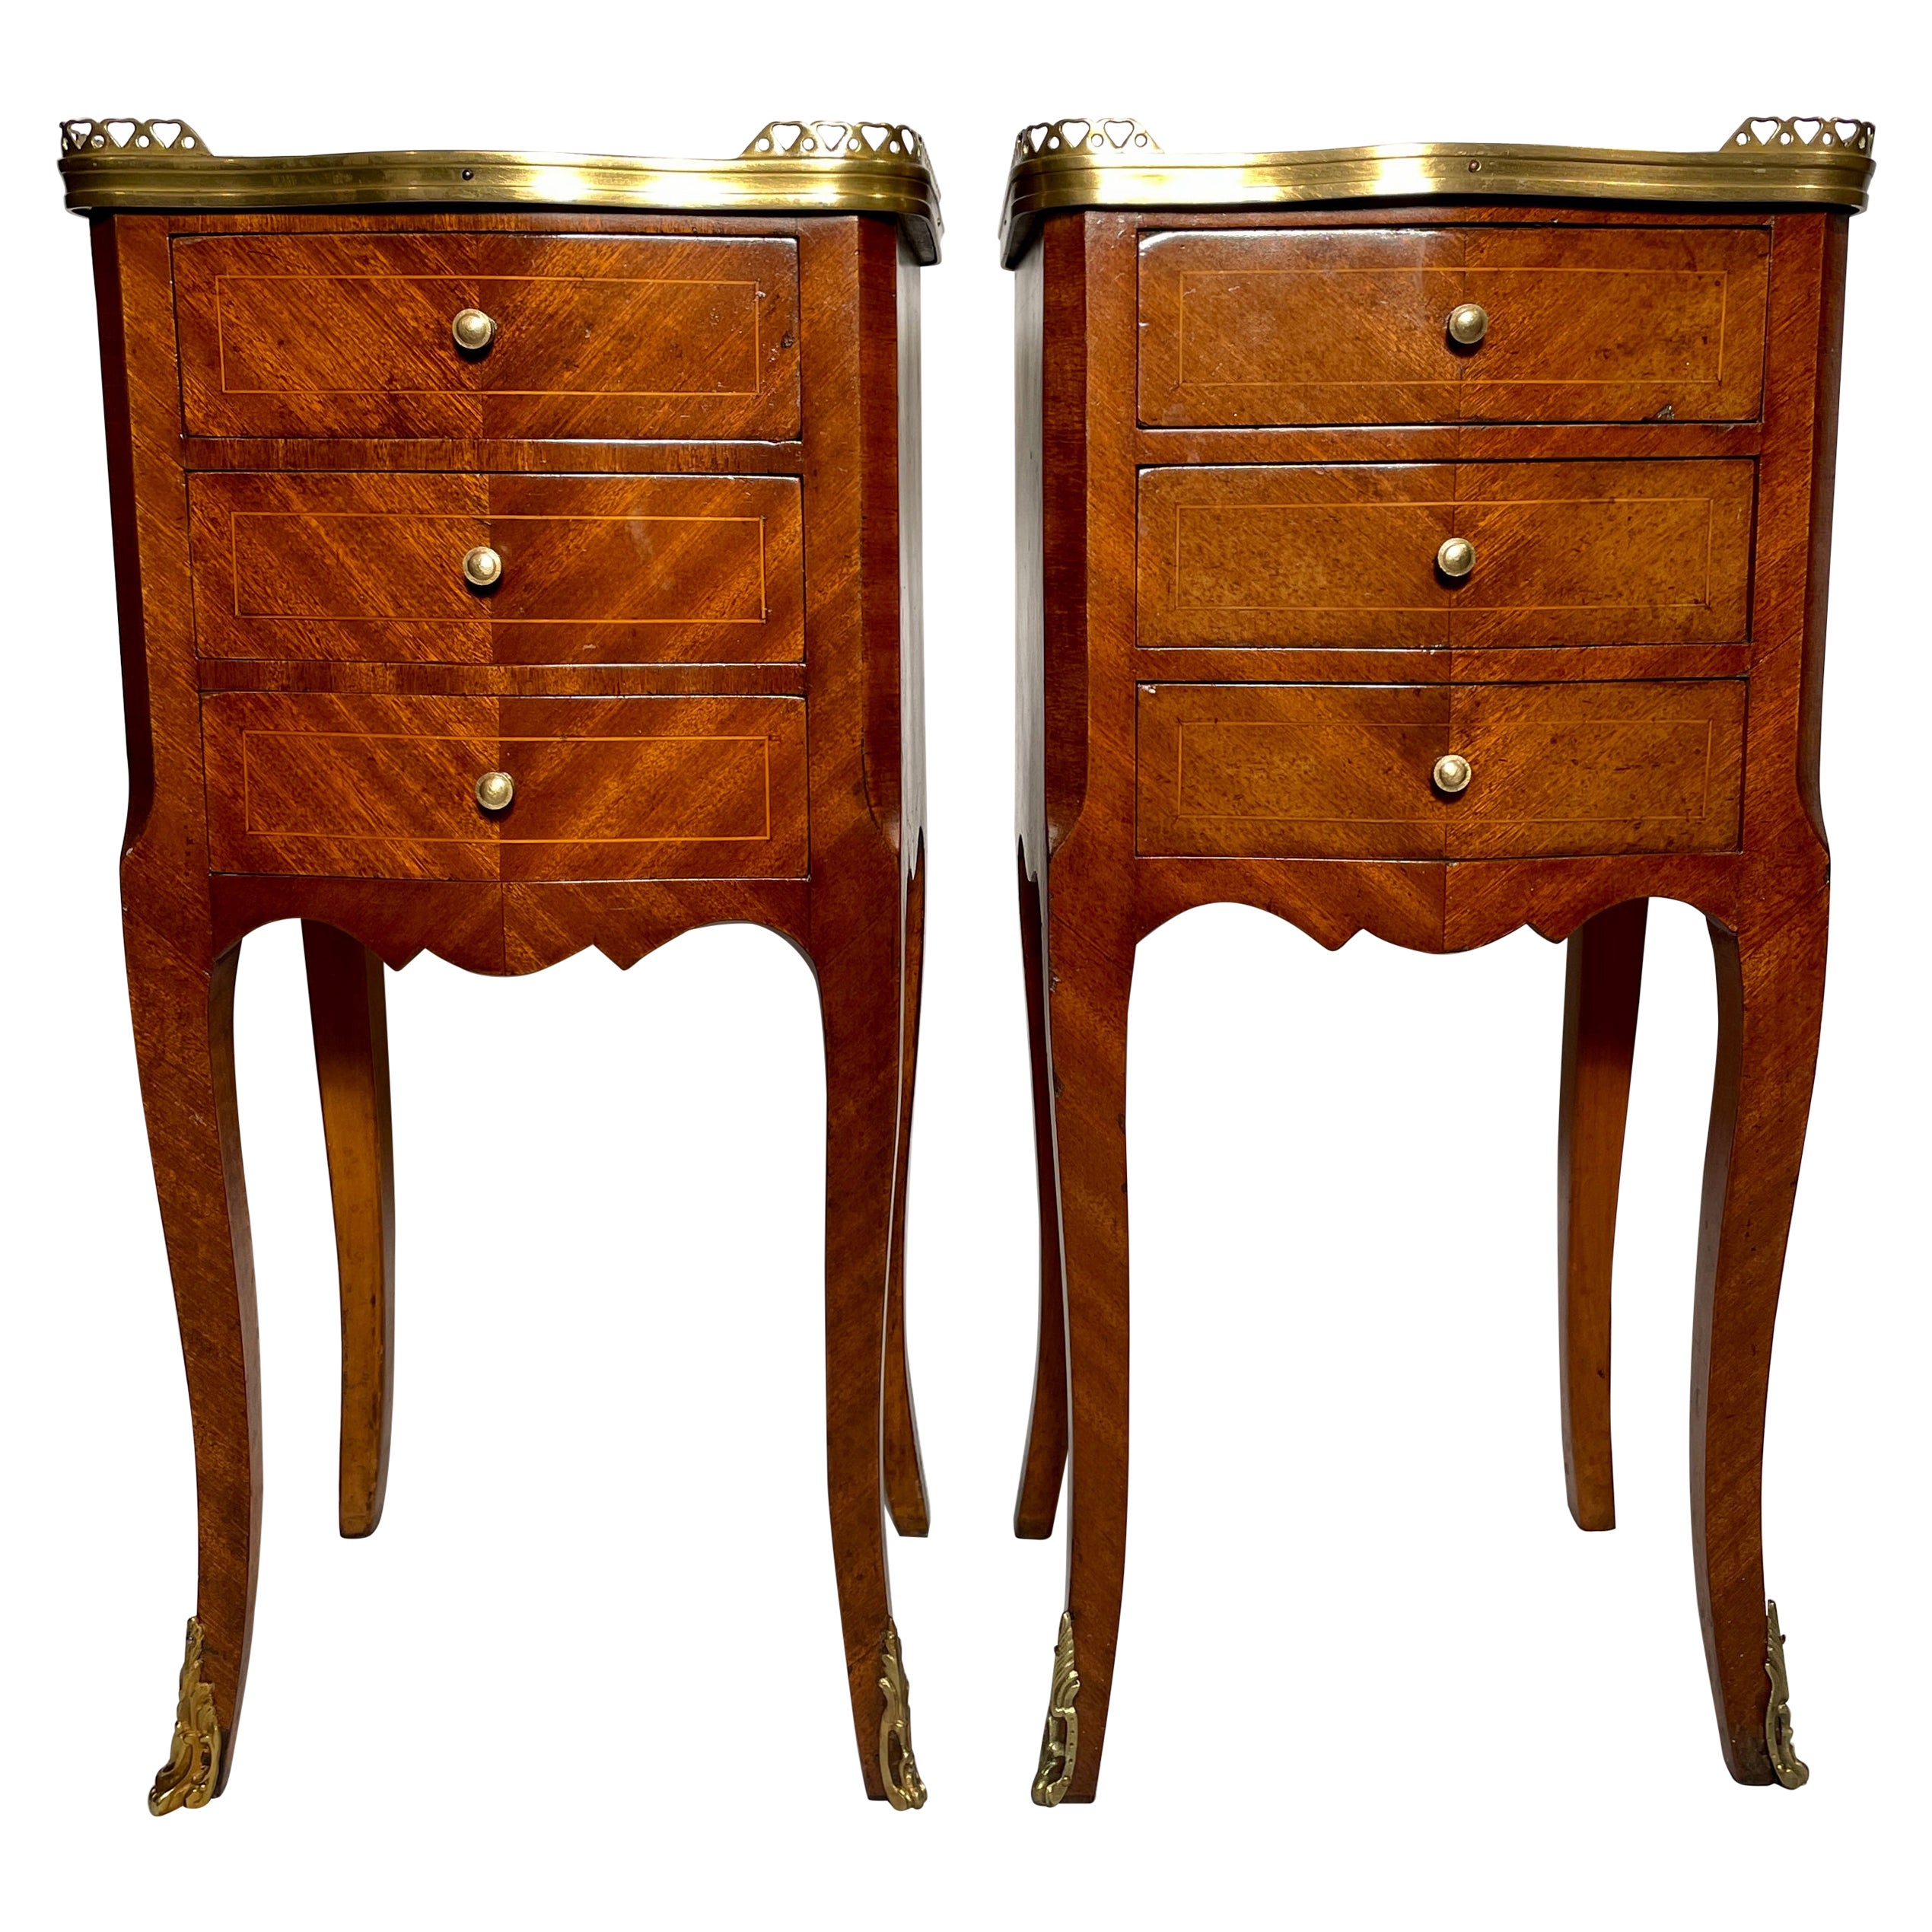 Pair Antique French Inlaid Mahogany Galleried-Top Bedside Tables, Circa 1900